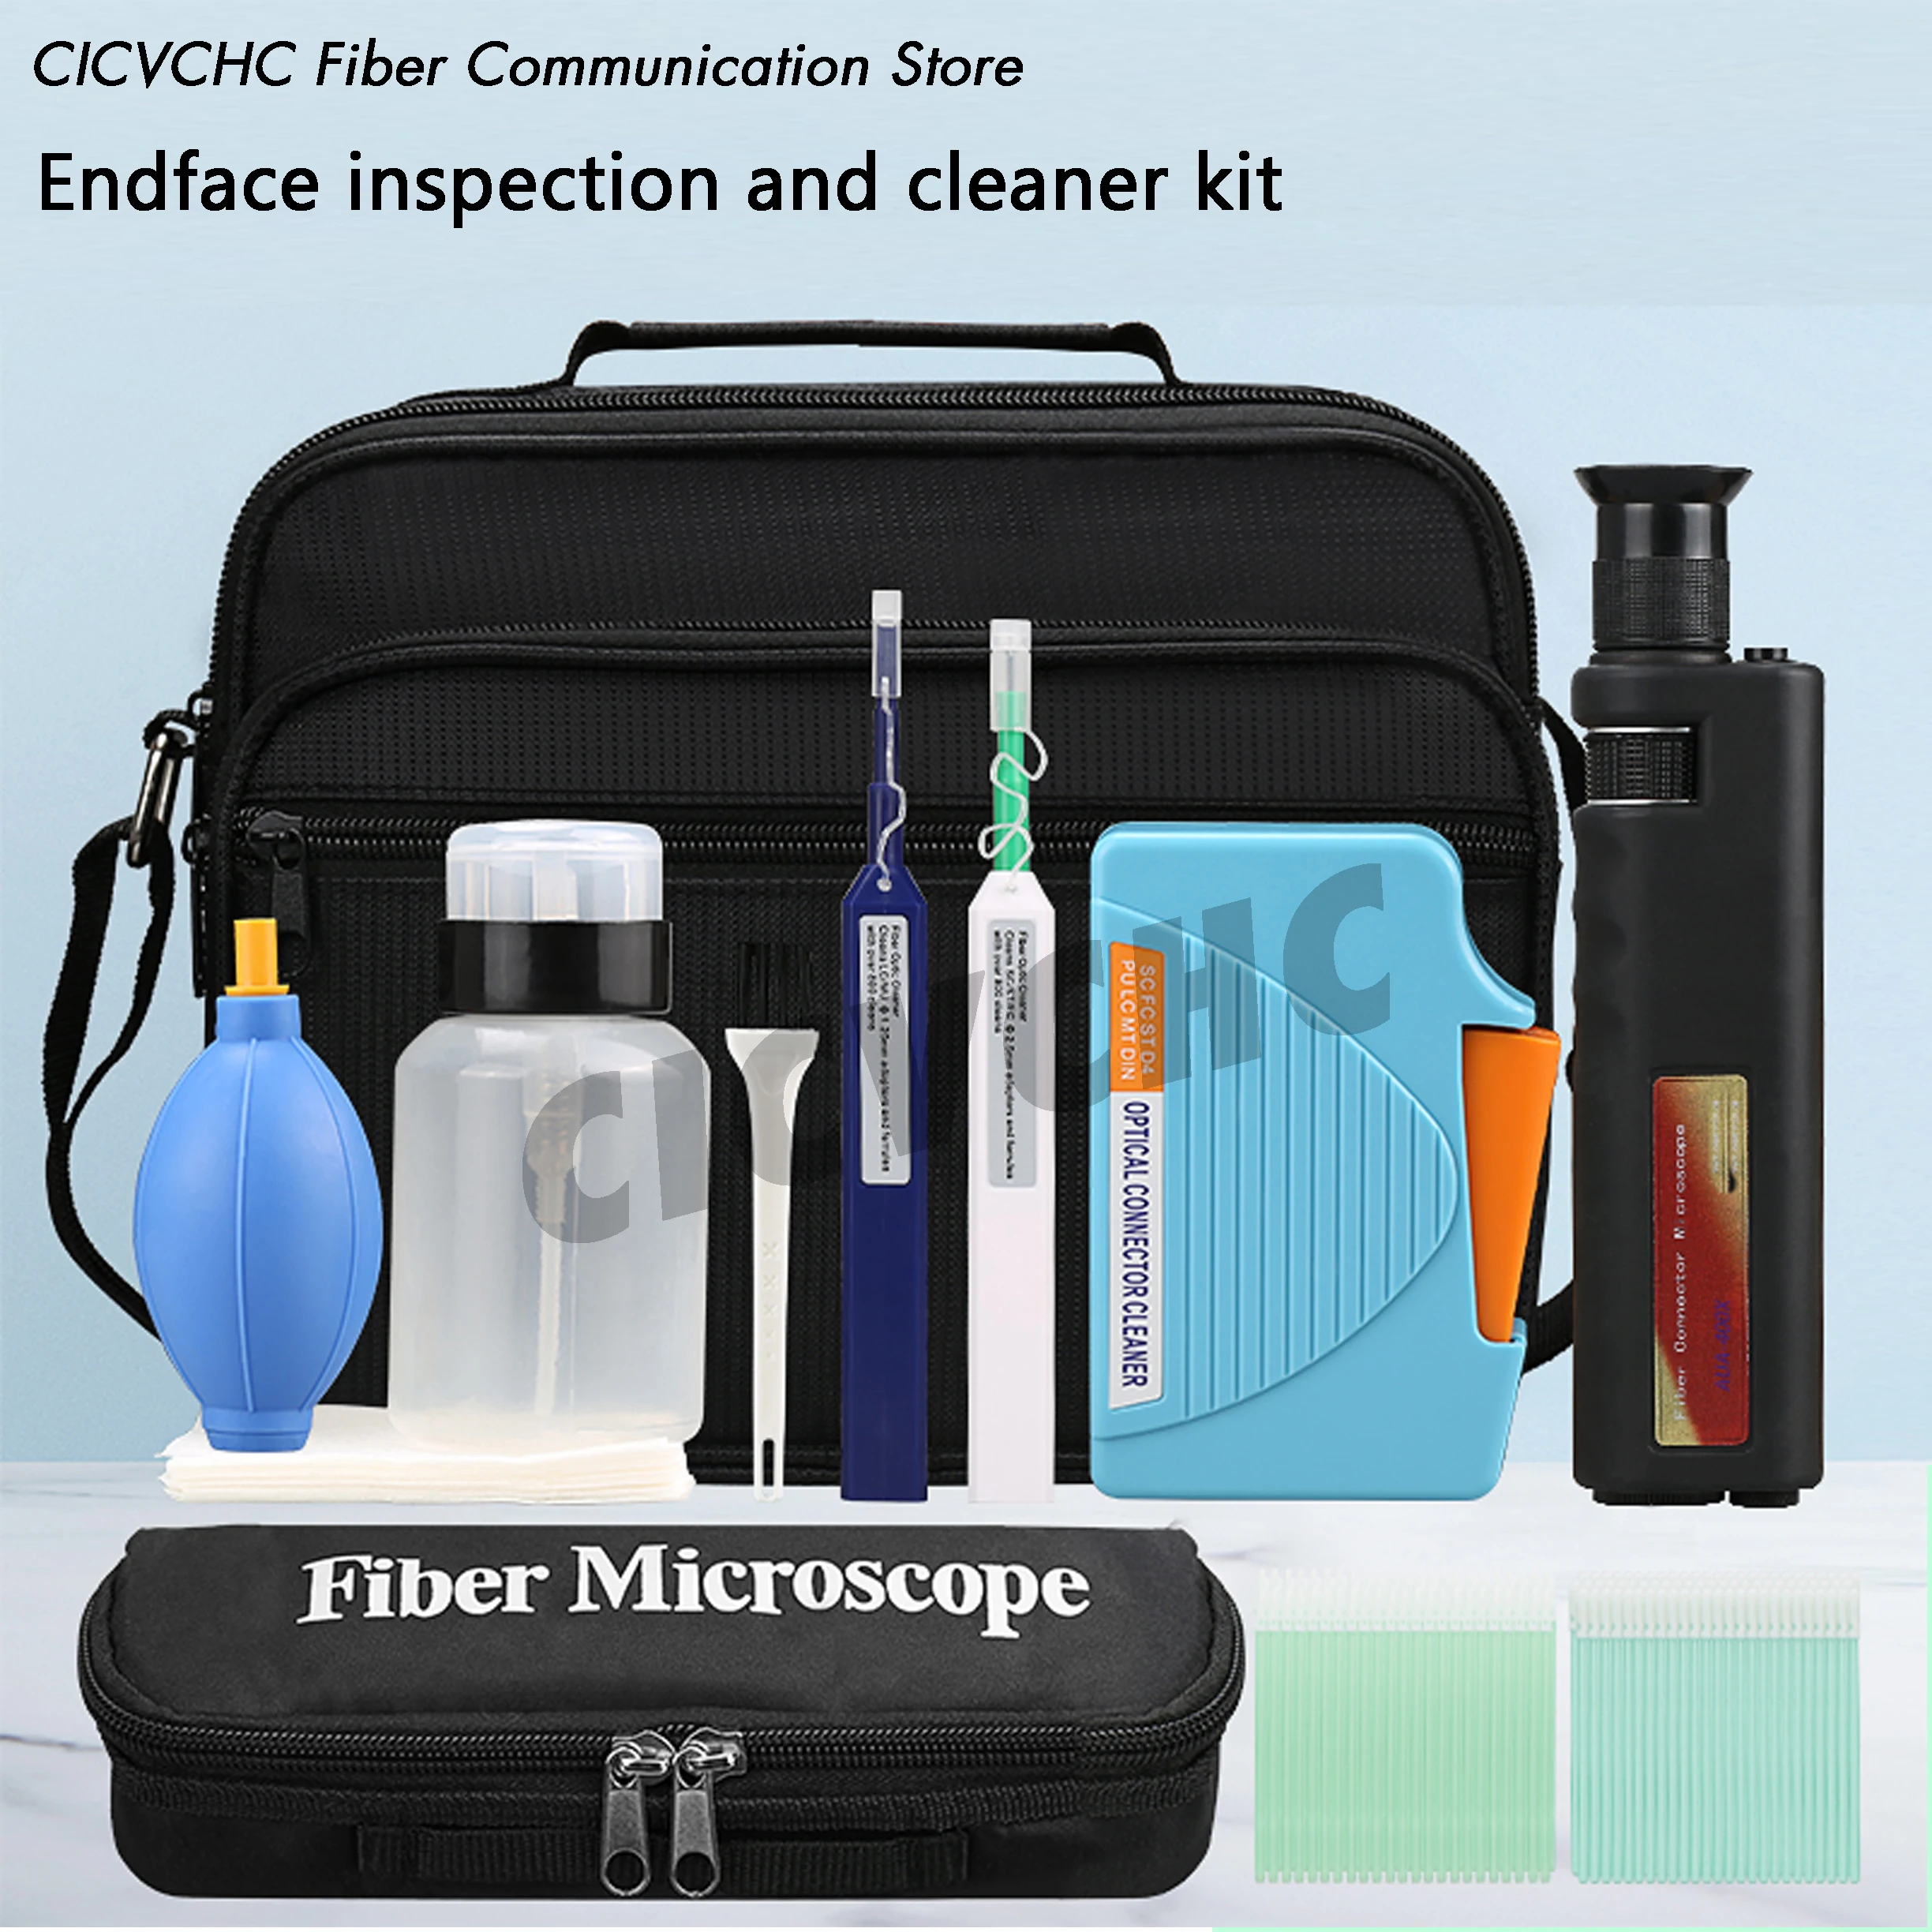 Fiber end-face inspection and cleaner tool kit with 400x fiber microscope (Hand held) hand held veterinary handscan for dog cat along with abdominal probe animal inspection